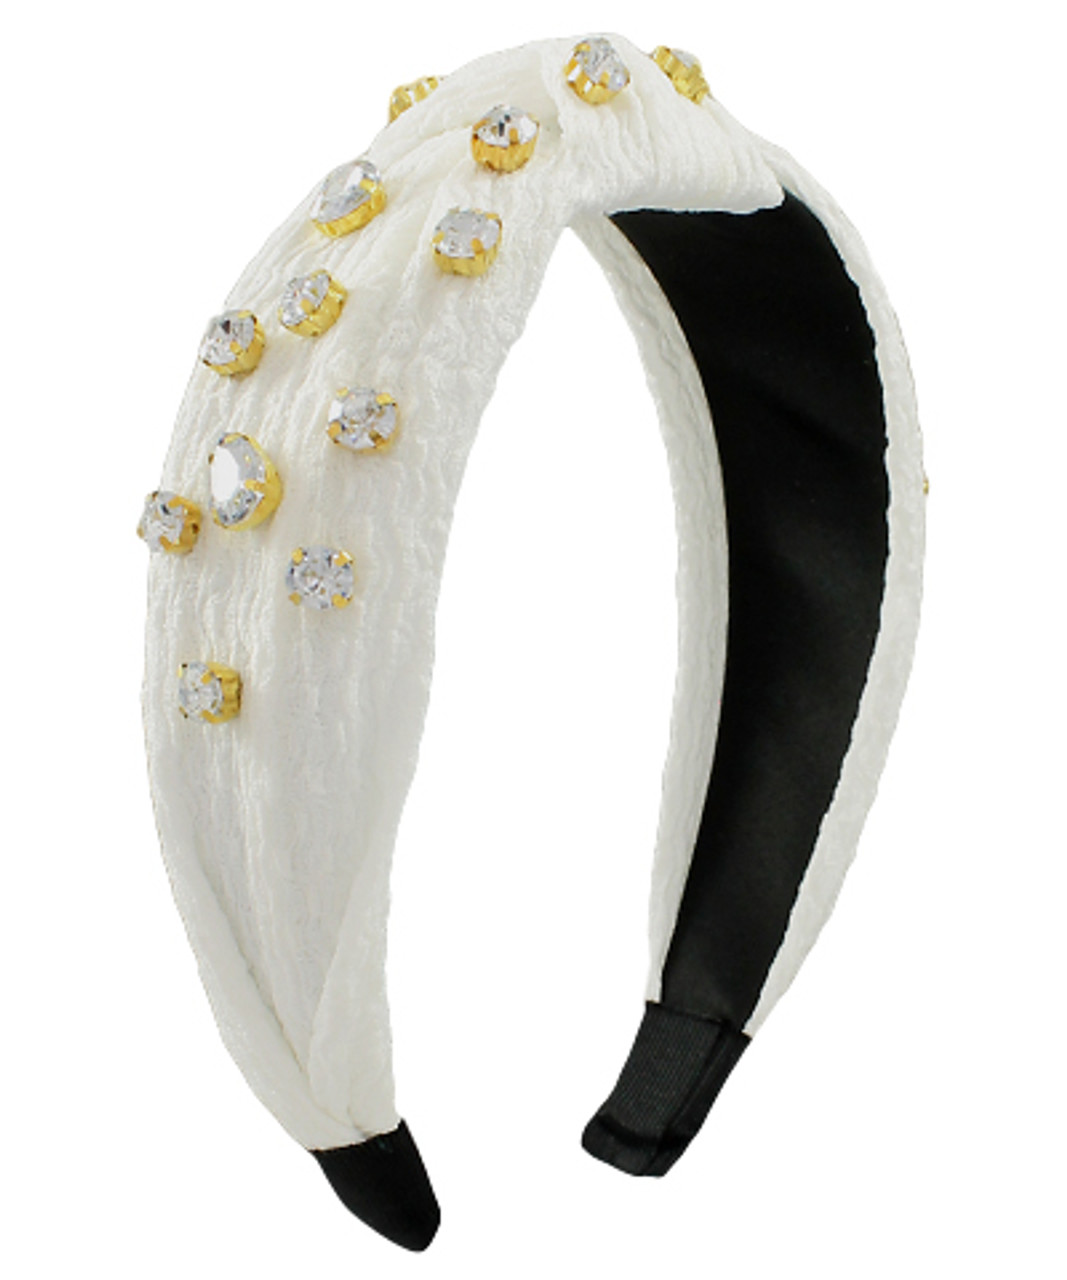 White Headband With Have - Have I to It Just Stones